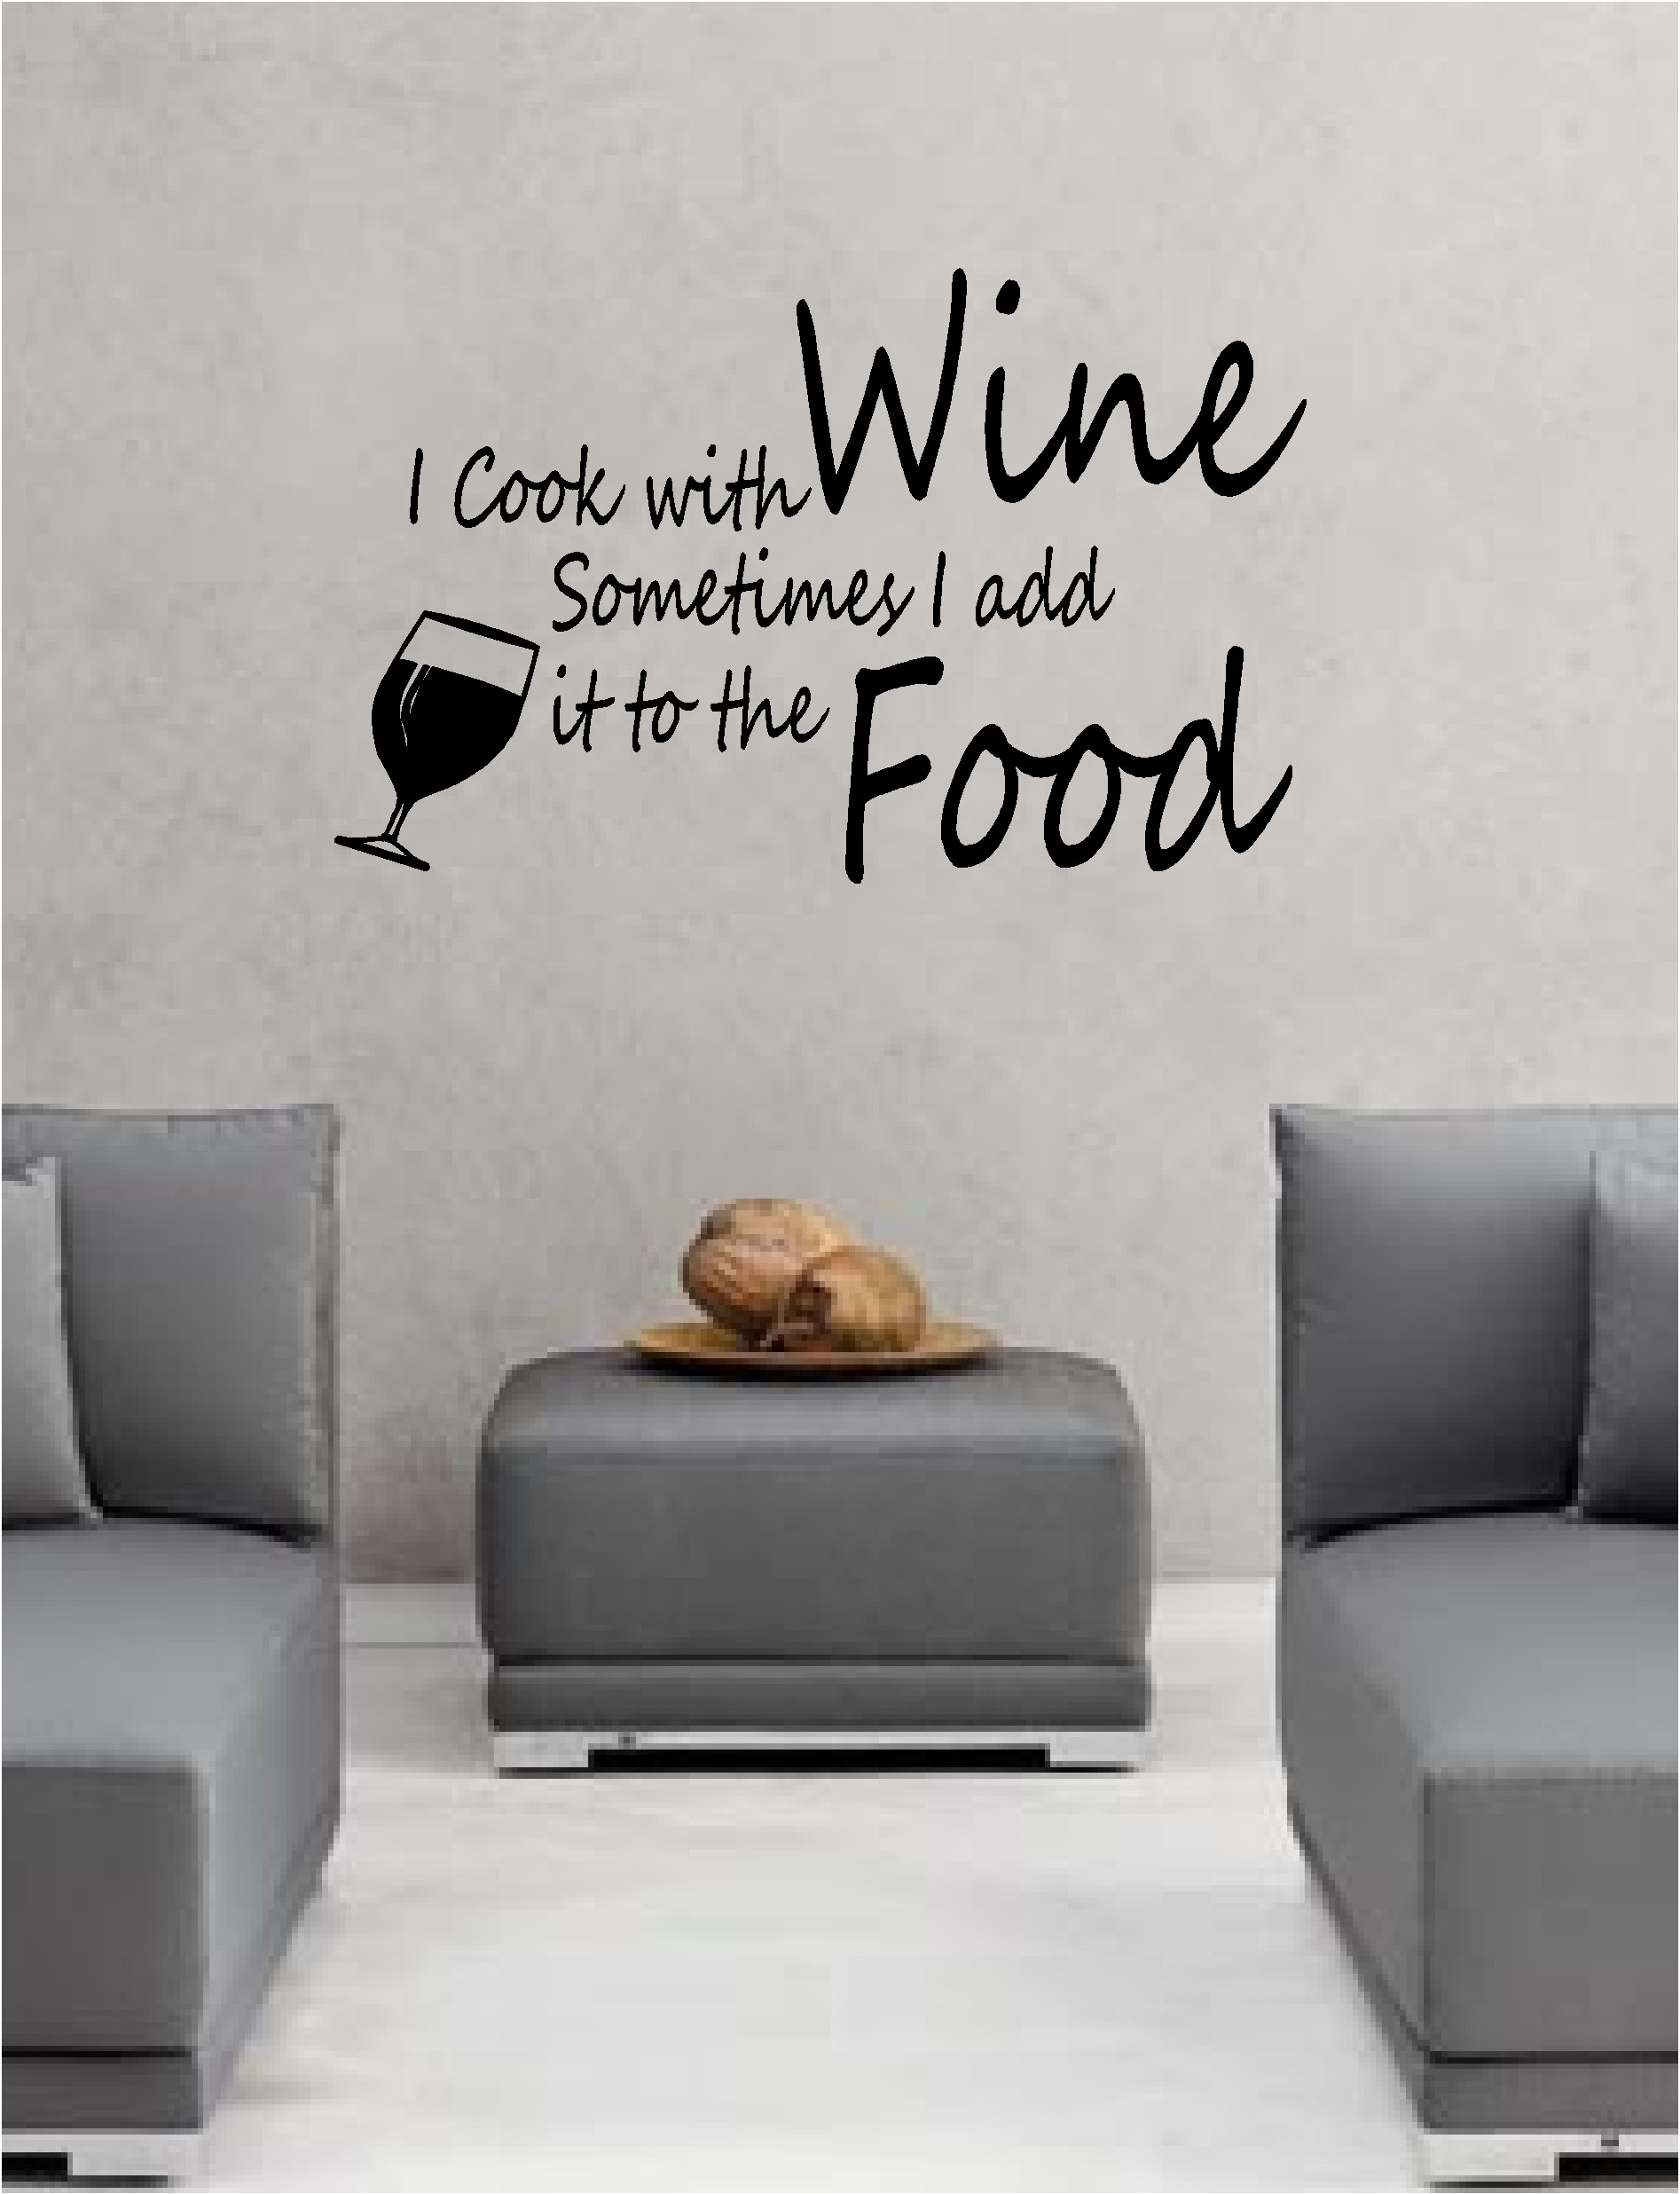 Wall Art For The Kitchen
 I COOK WITH WINE wall art vinyl lounge kitchen QUOTE